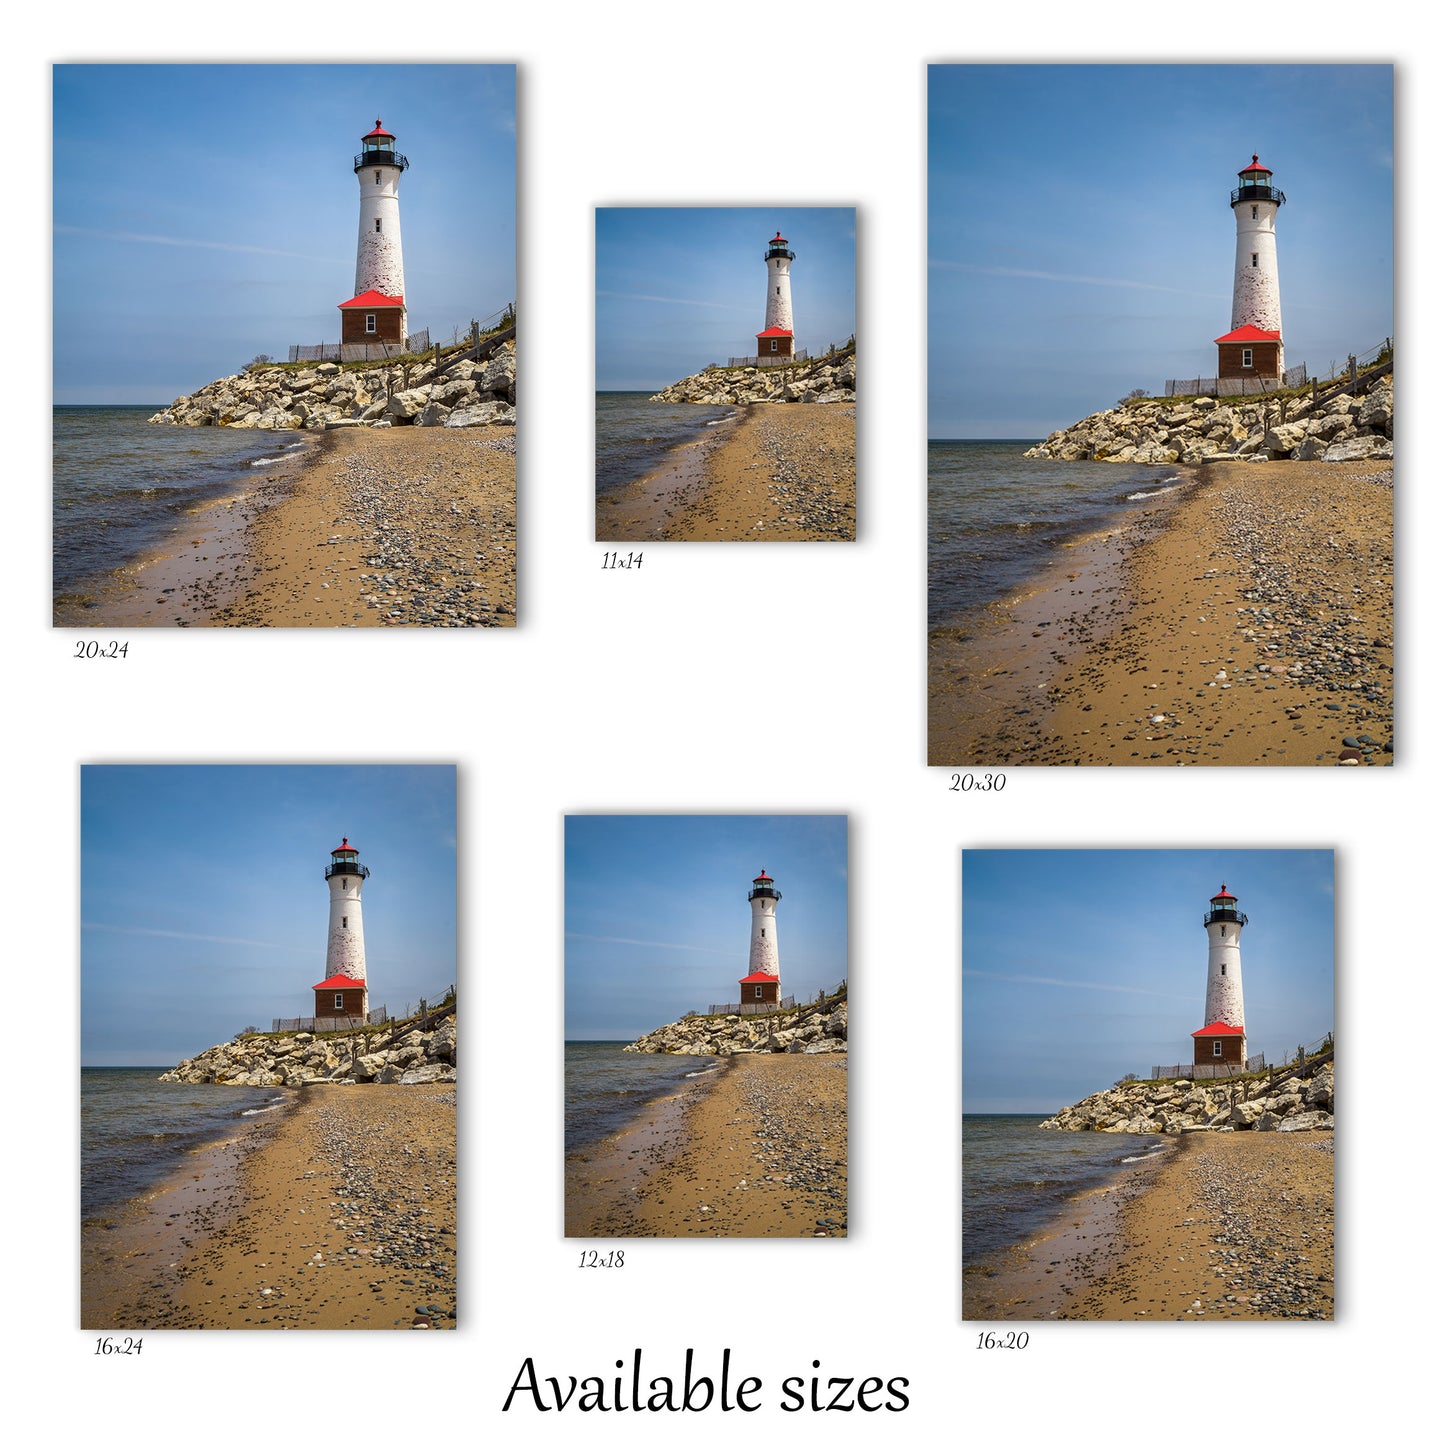 Visual representation of the Crisp Point Michigan lighthouse canvas wall art print sizes available: 11x14, 12x18, 16x20, 16x24, 20x24 and 20x30.